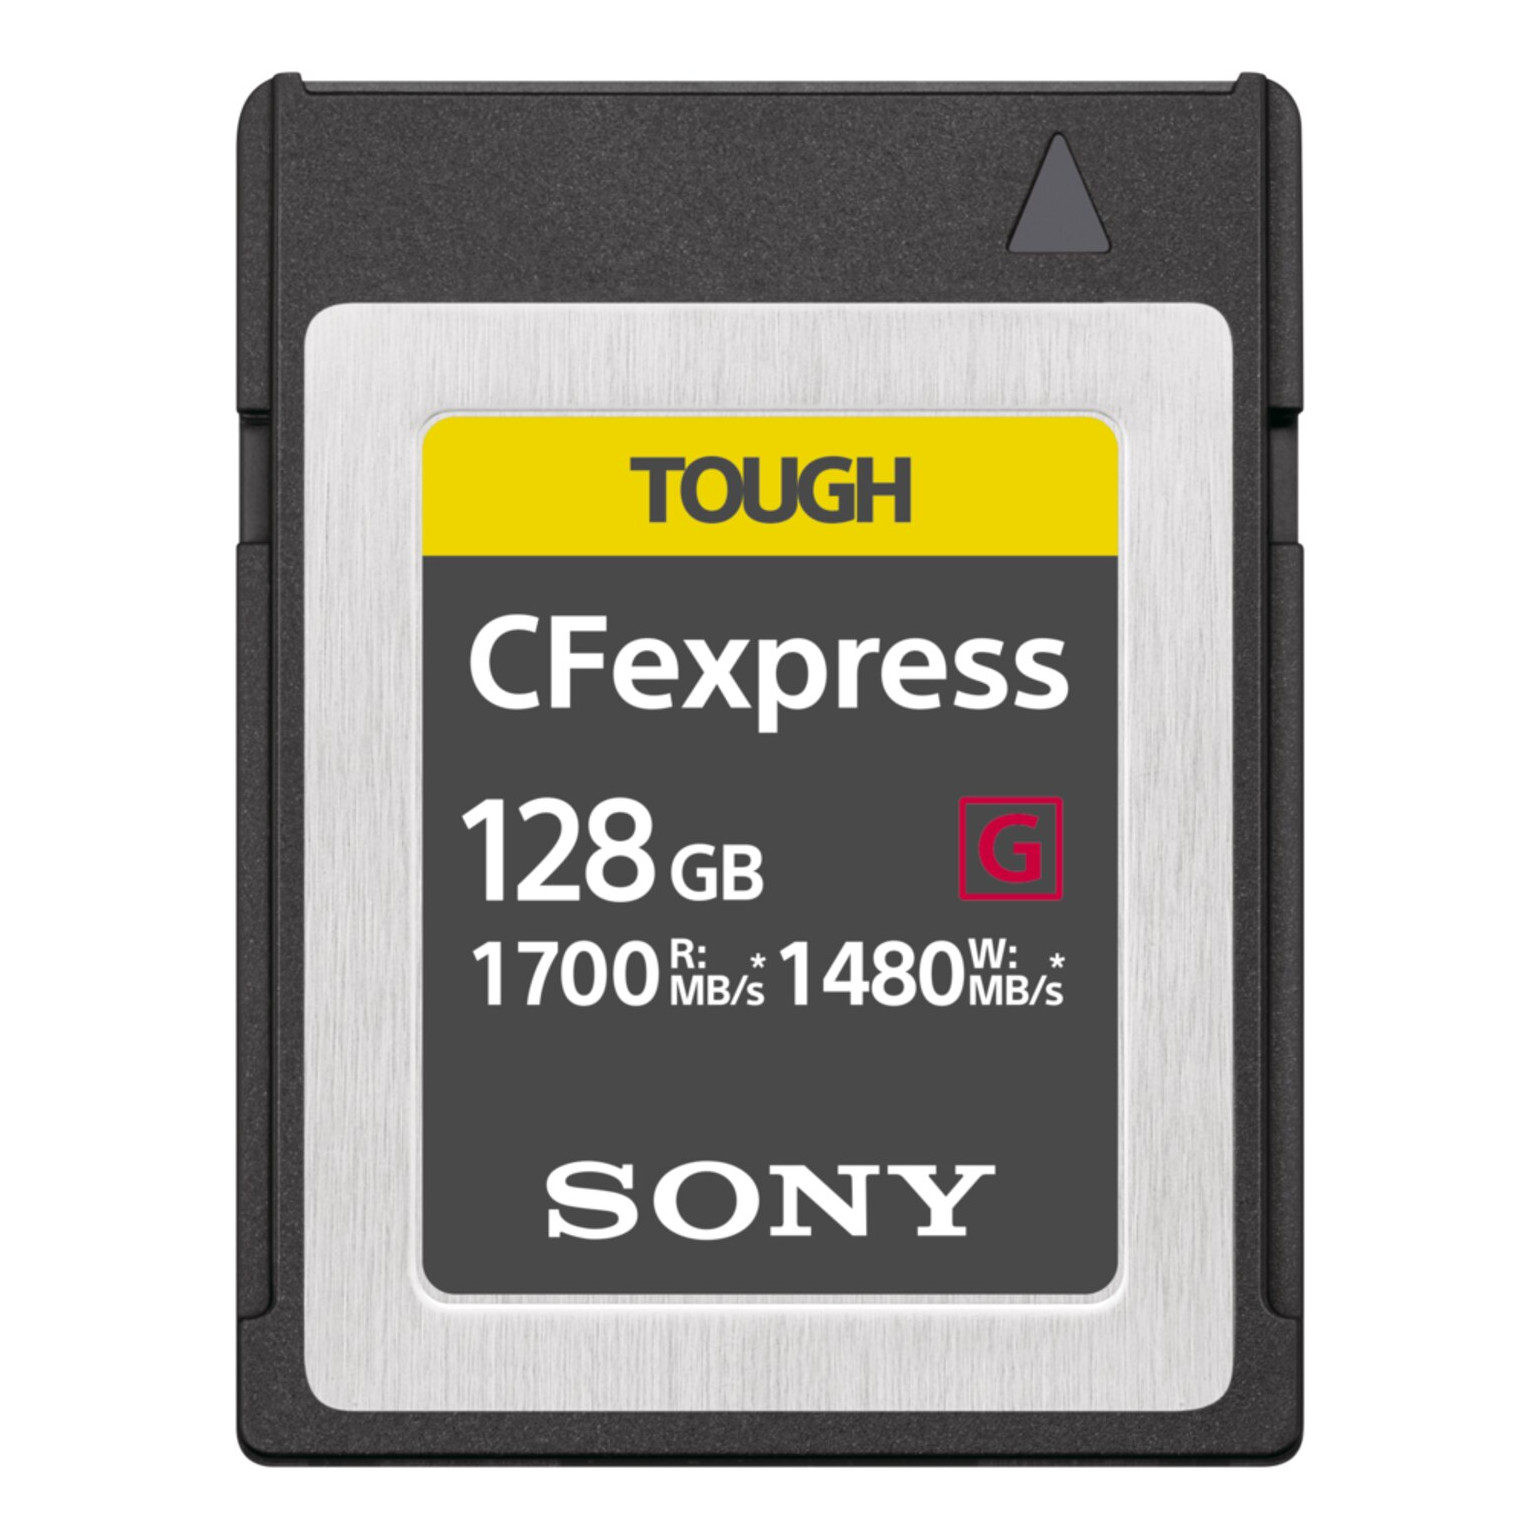 Sony 128GB Tough CFexpress Type B 1700MB/s geheugenkaart